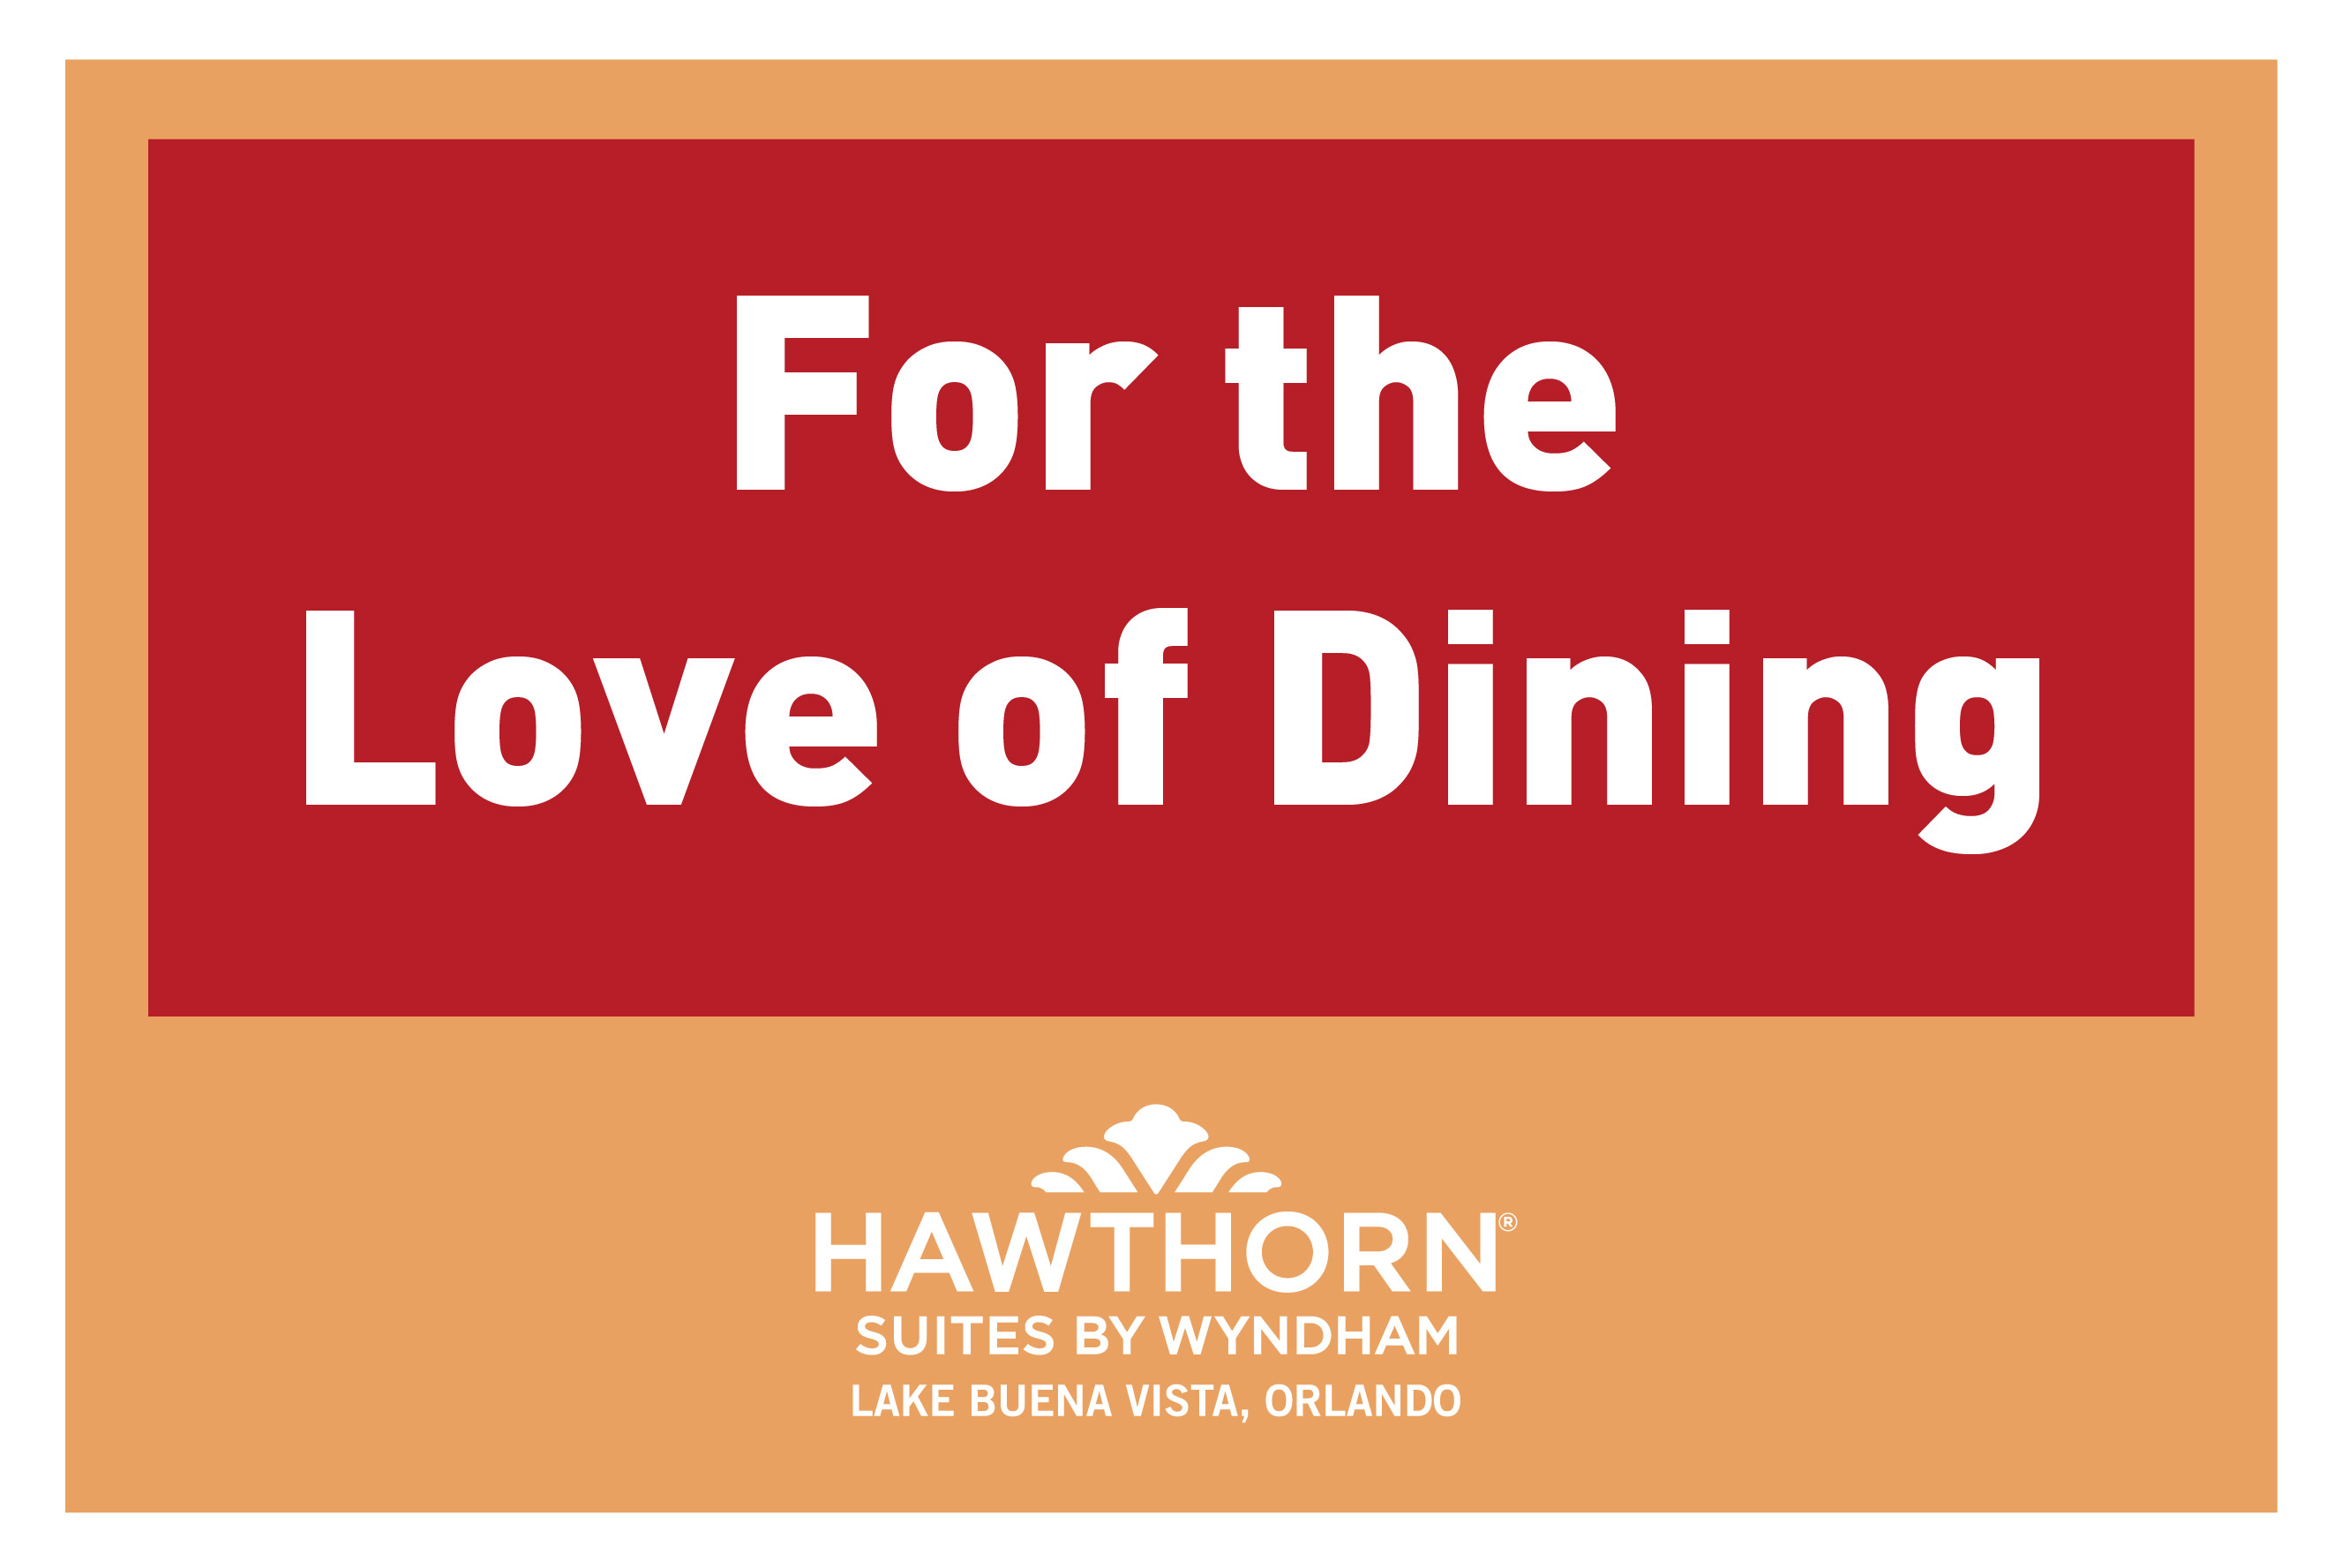 For the Love of Dining - Hawthorn Suites By Wyndham Lake Buena Vista, Orlando